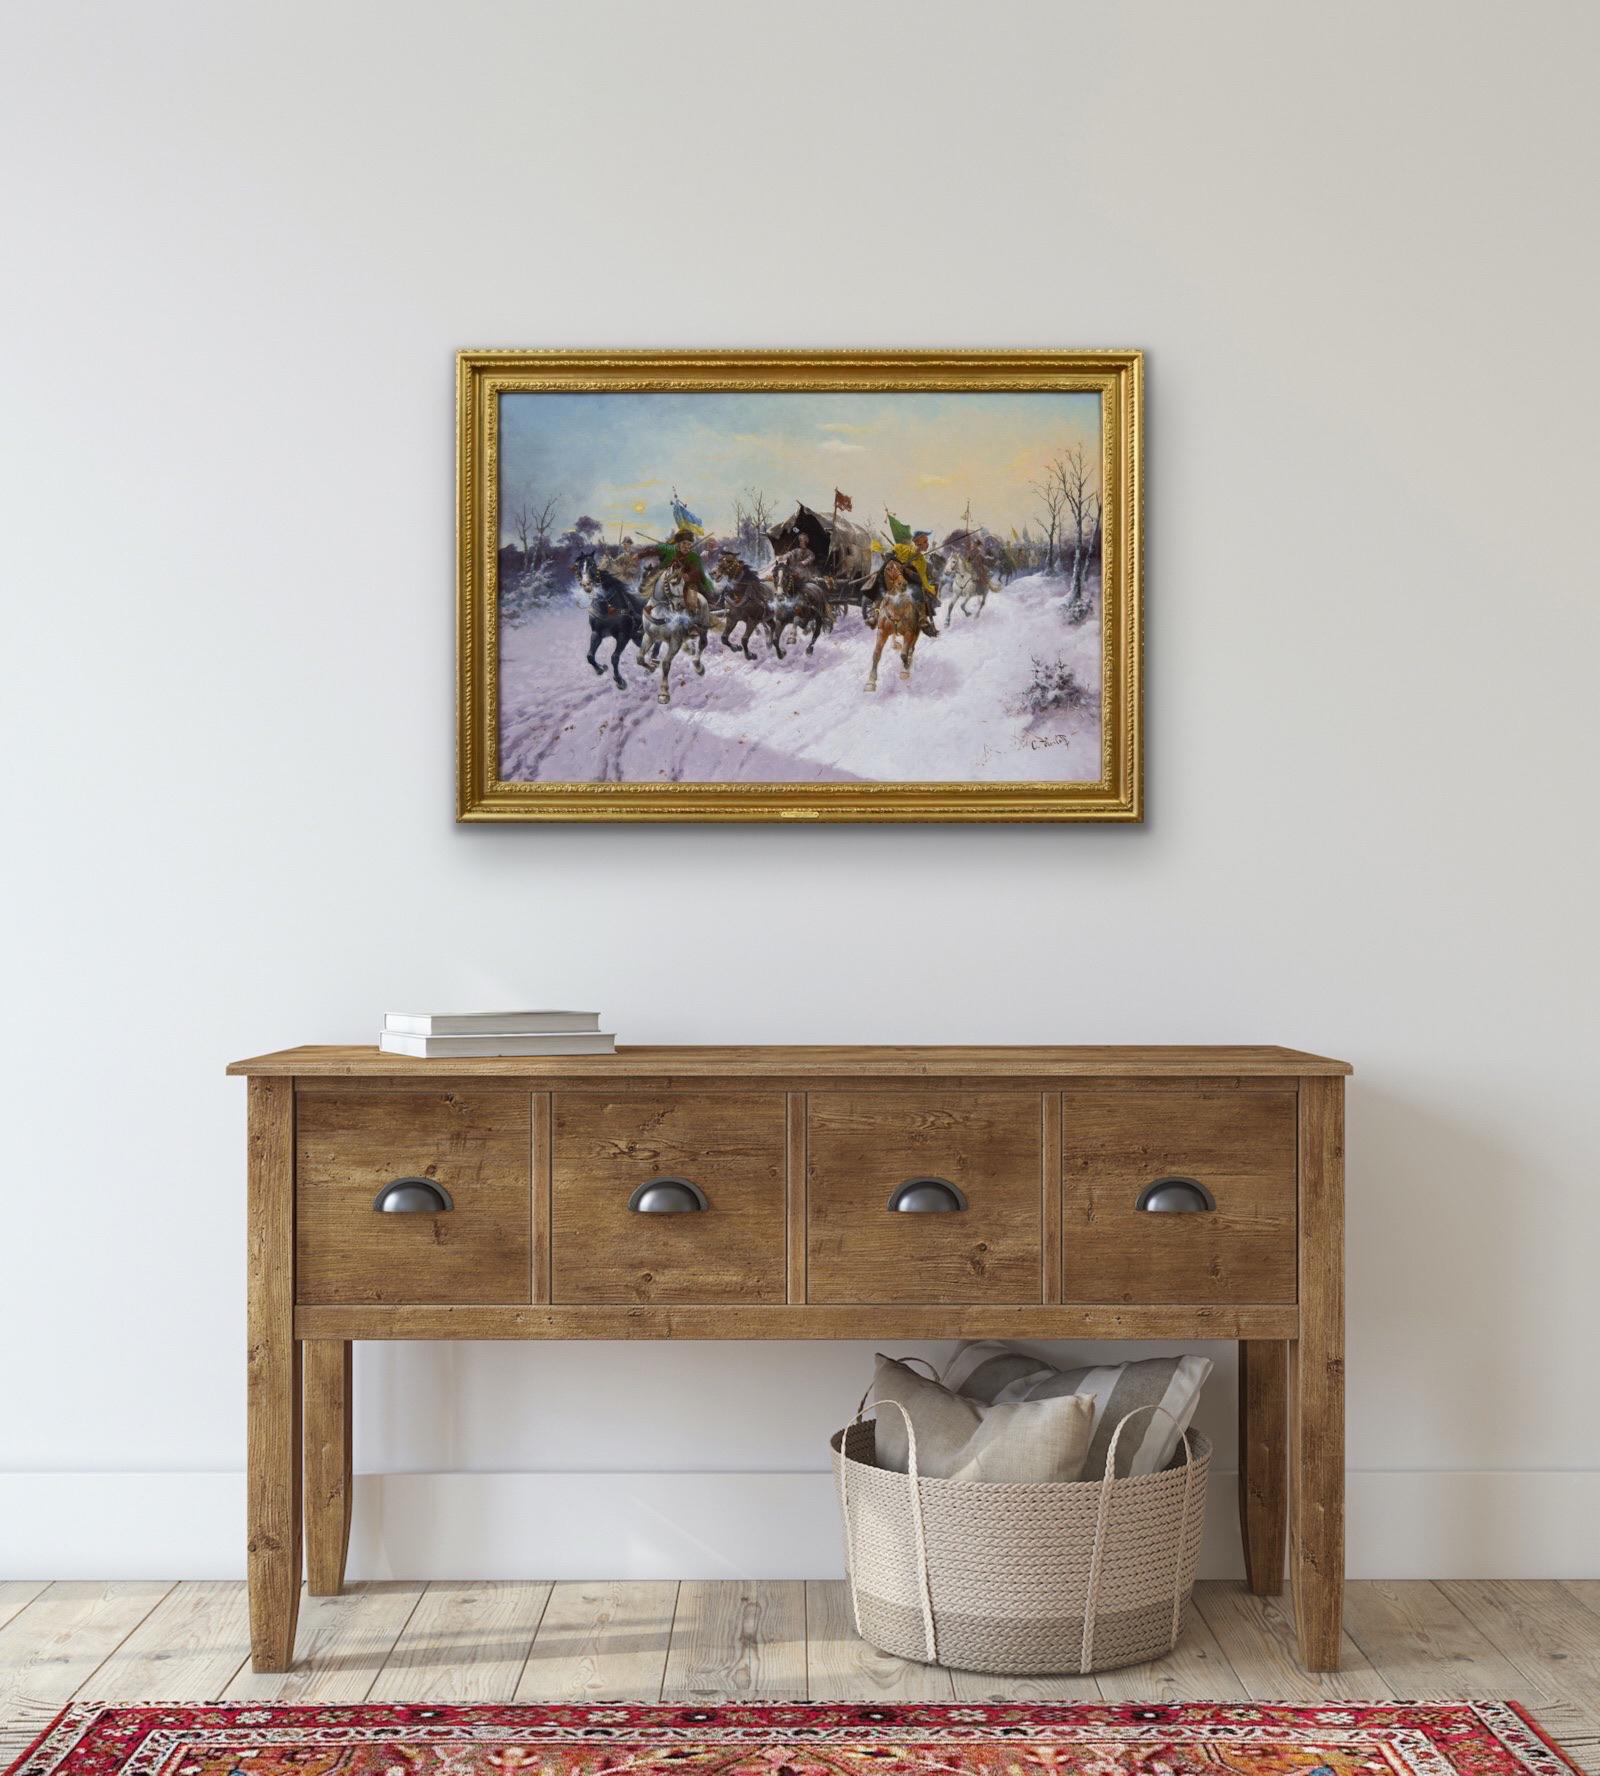 19th Century winter landscape oil painting of a caravan with Cossacks on horses For Sale 5